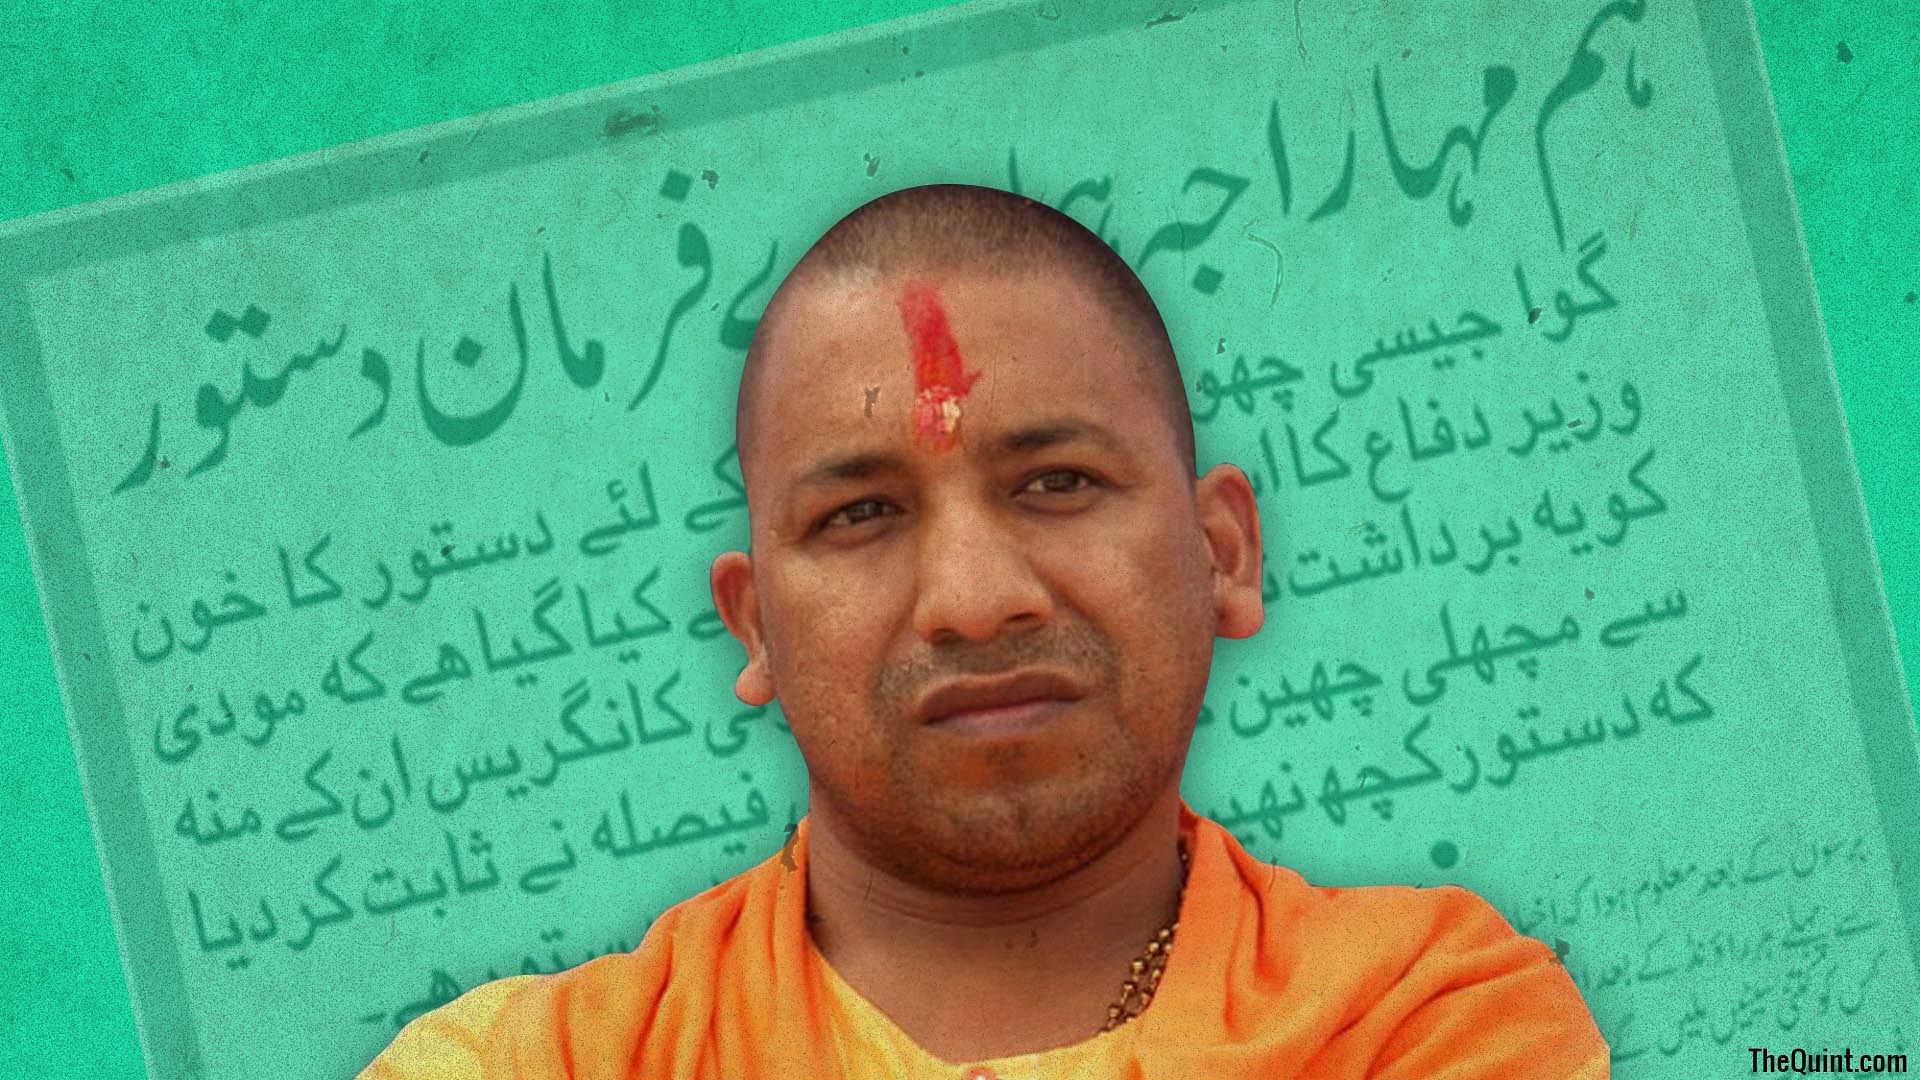 How is the Urdu media in India reacting to Yogi Adityanath’s appointment as the new UP CM? (Image: Harsh Sahani/<b>The Quint</b>)